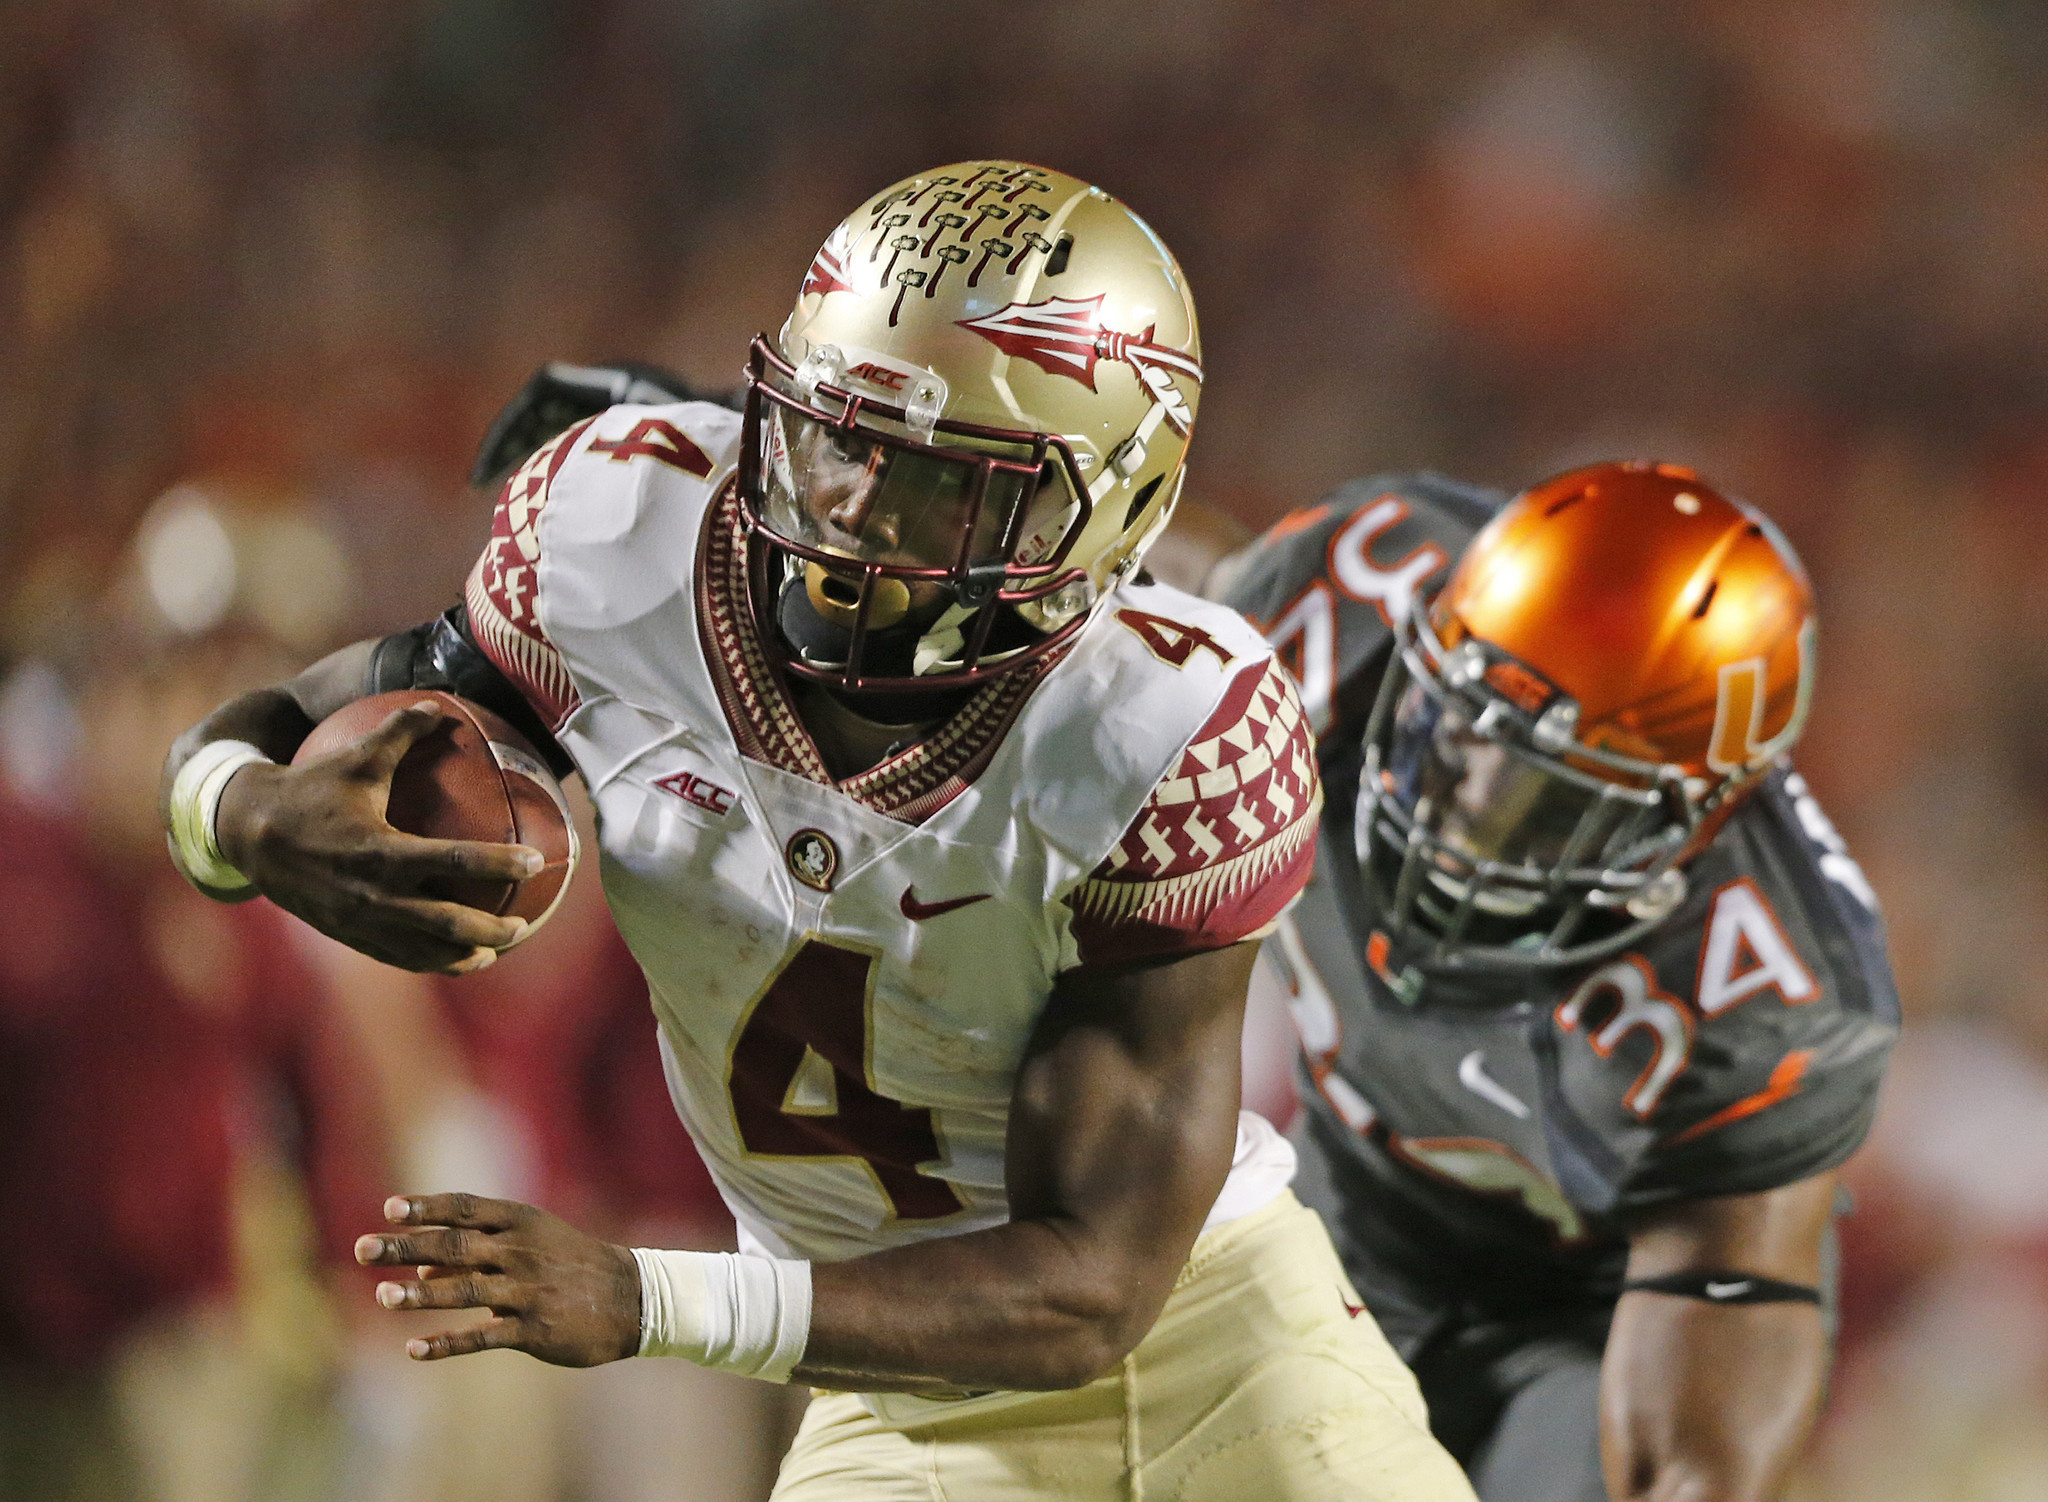 la-sp-sn-florida-state-dalvin-cook-allegedly-punches-woman-outside-bar-20150710